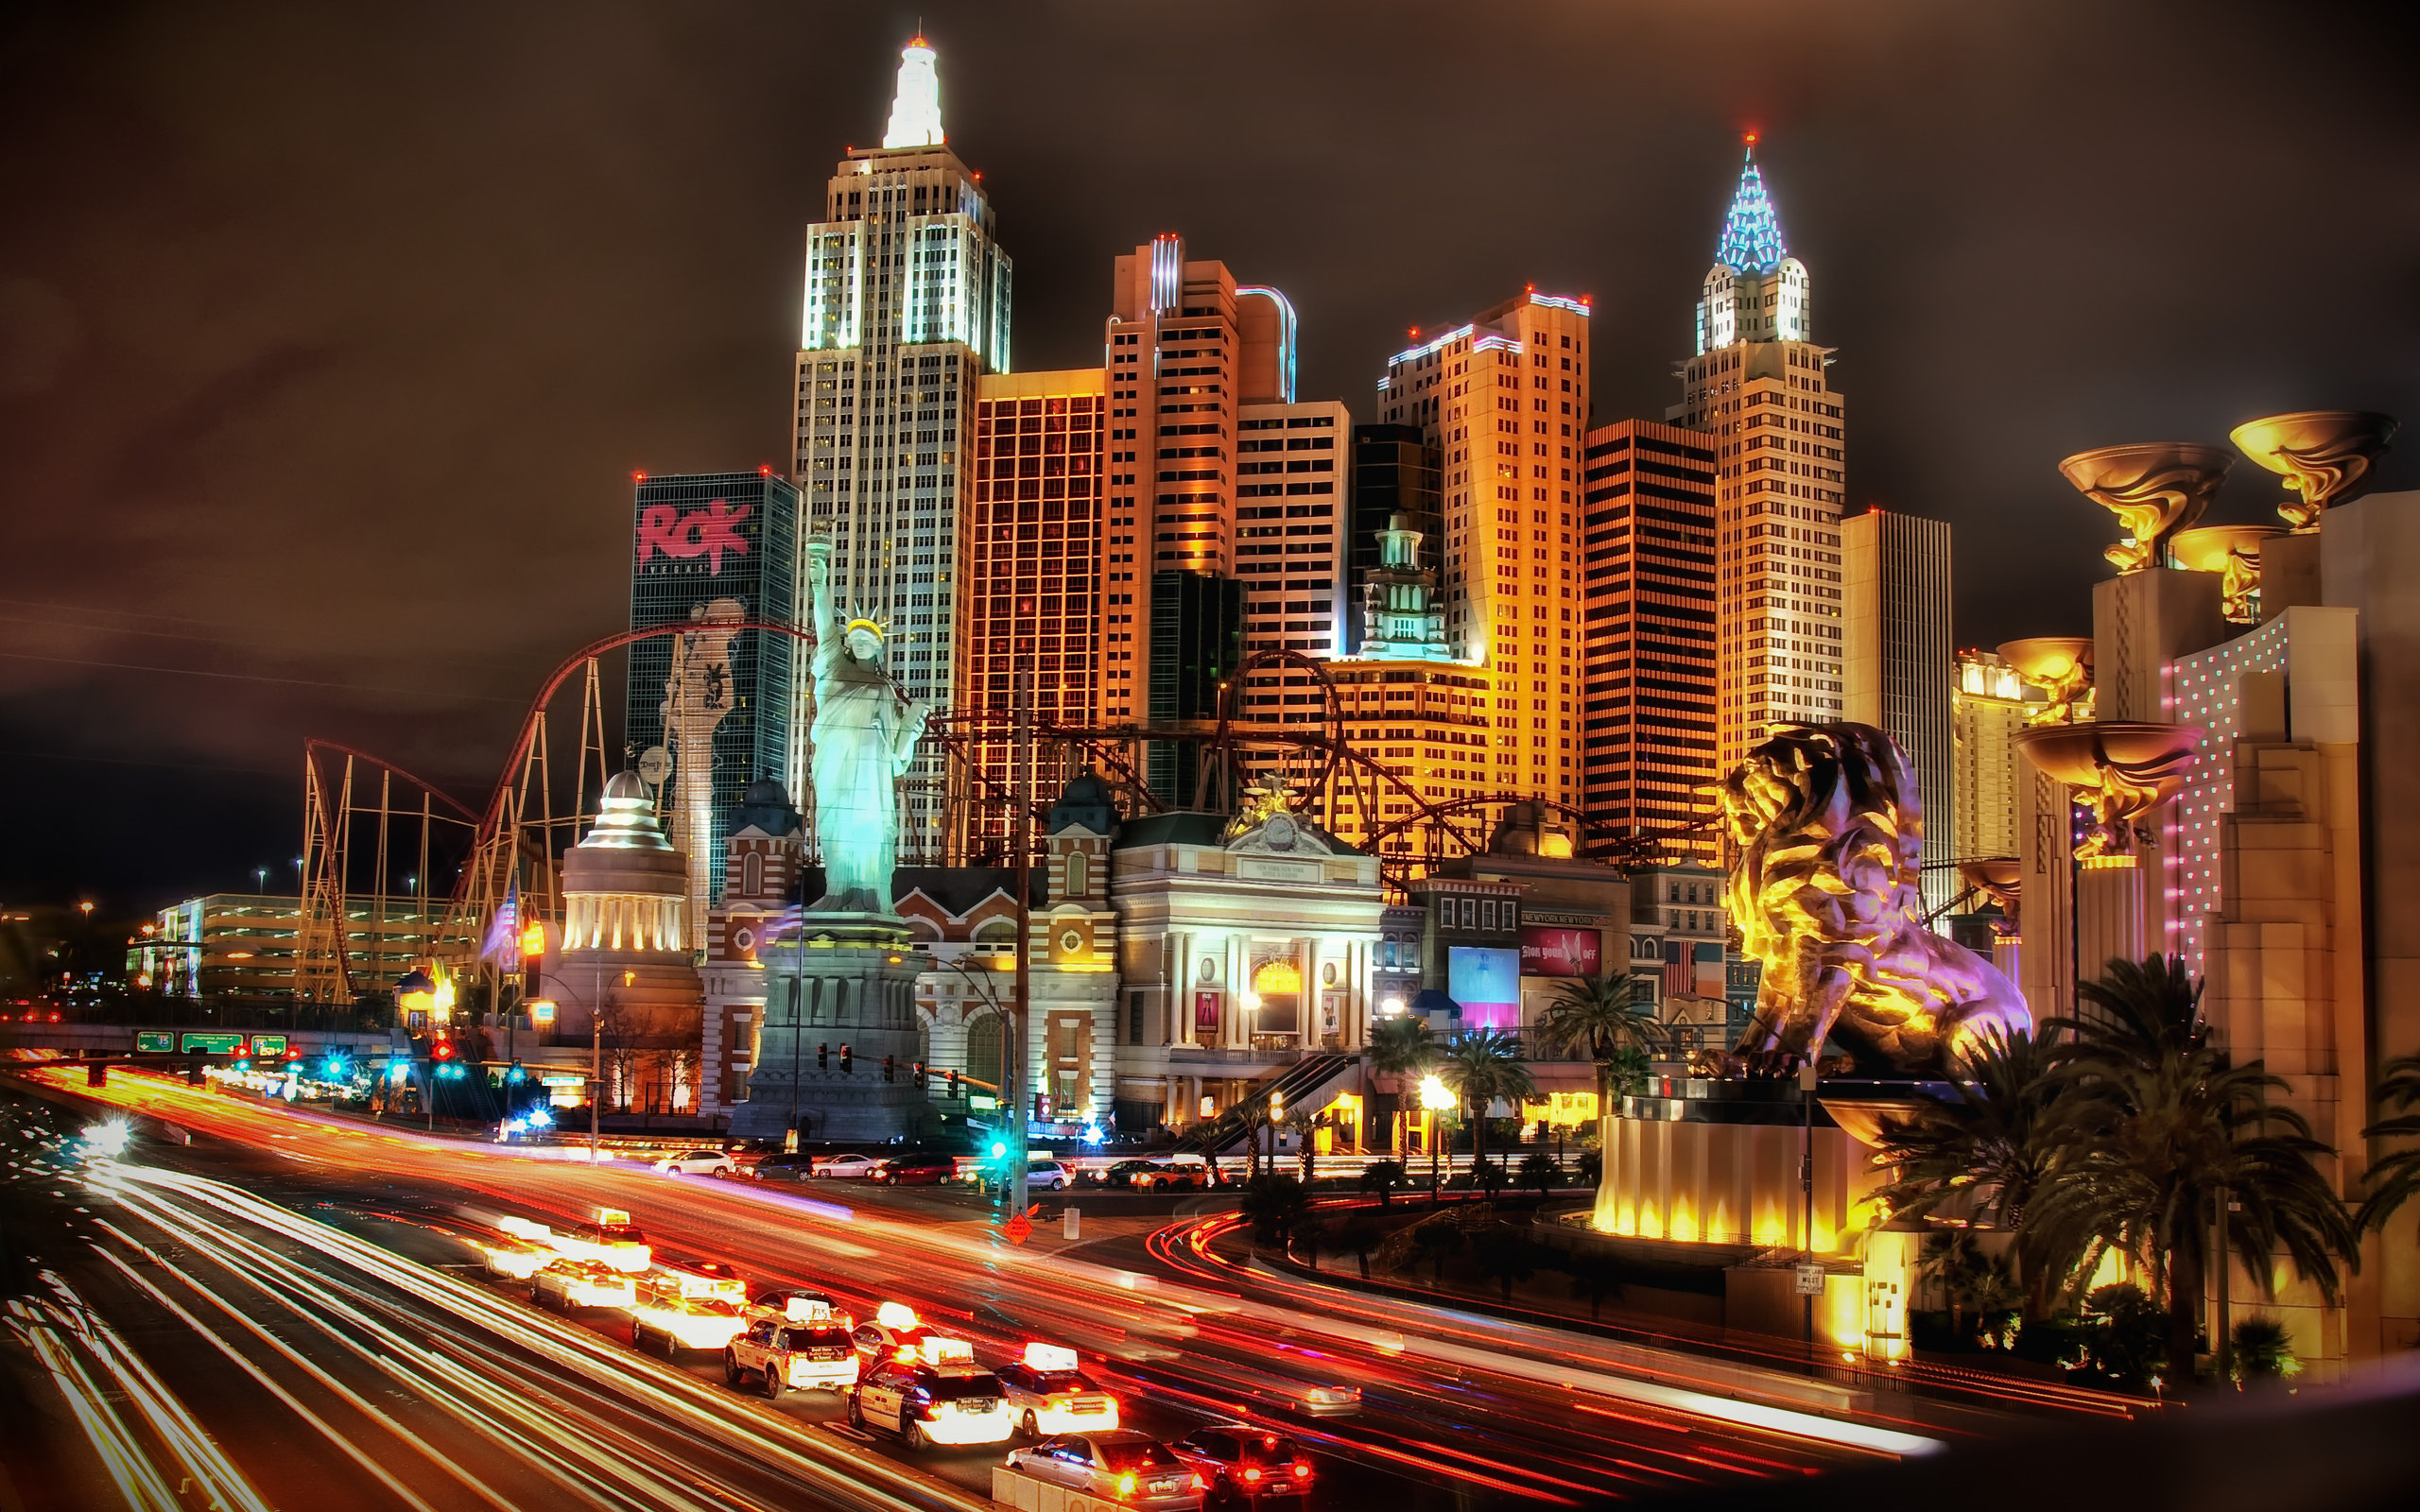 Las Vegas wallpapers and images - wallpapers, pictures, photos